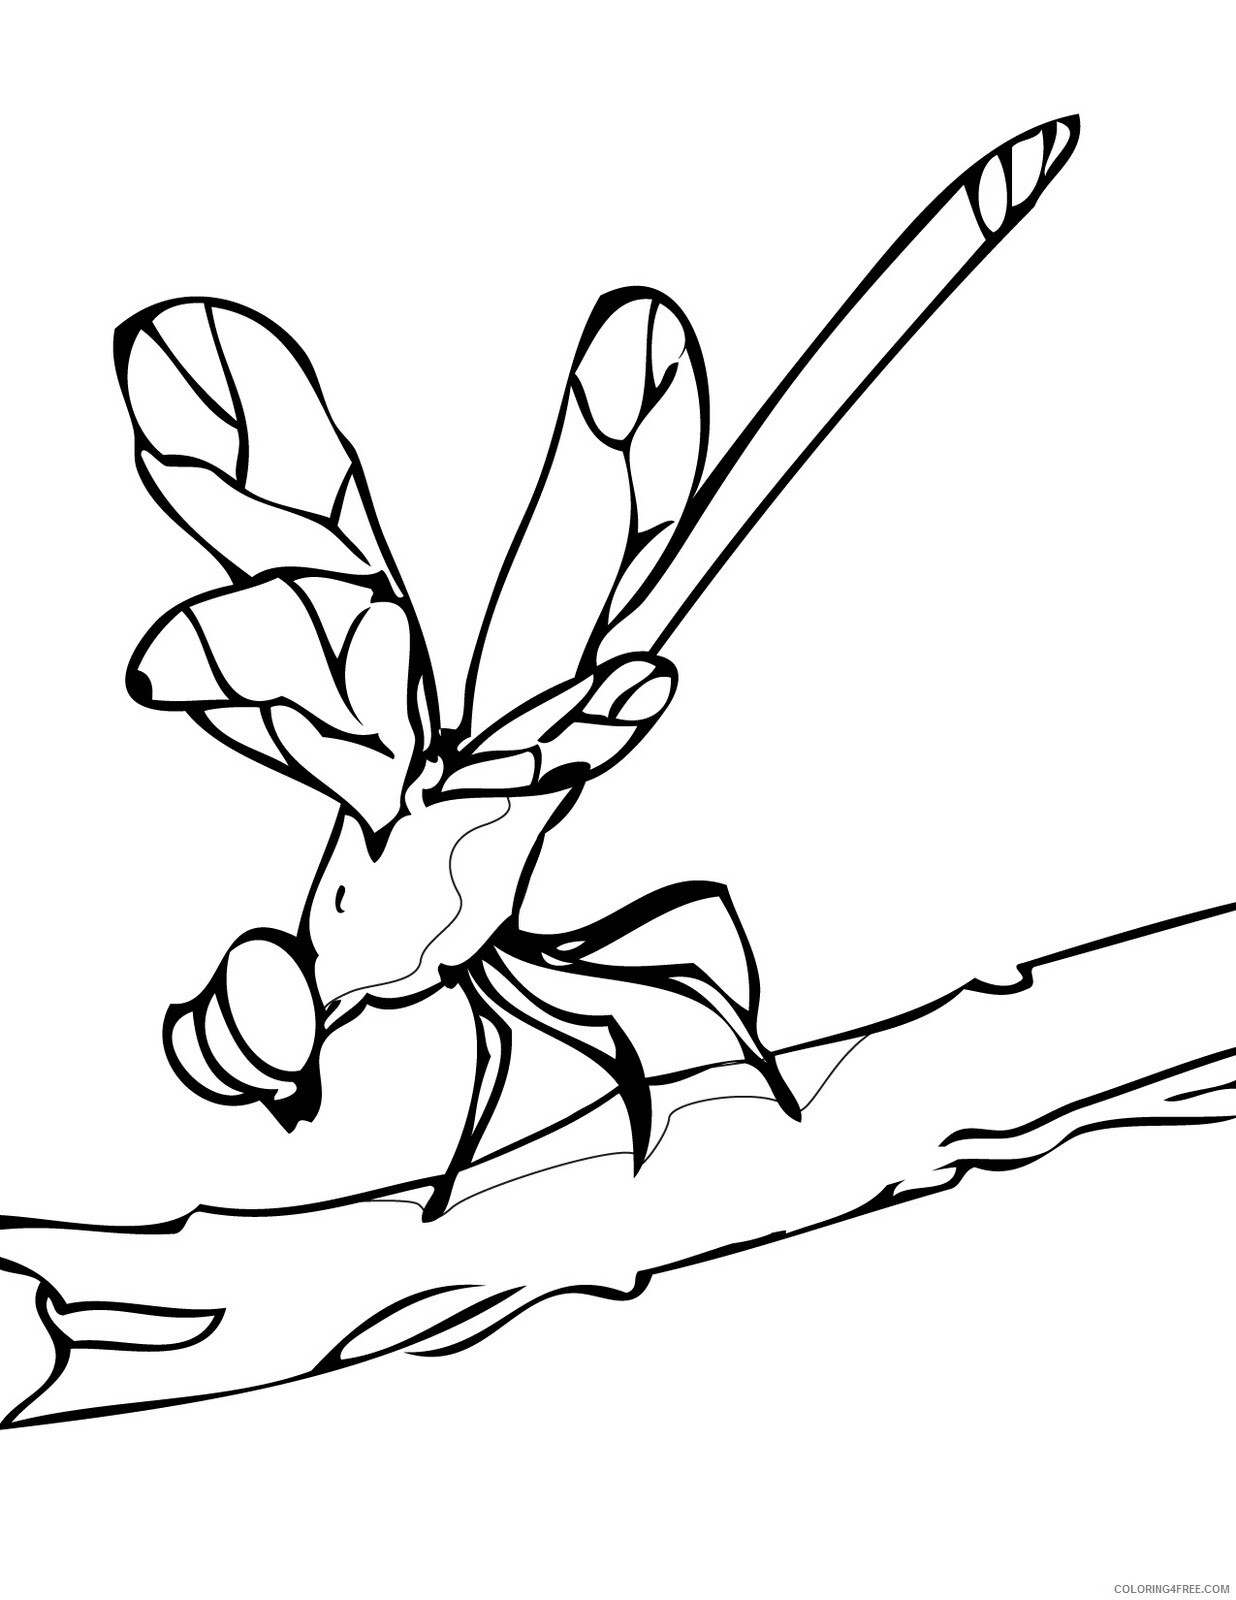 Dragonfly Coloring Pages Animal Printable Sheets Printable Dragonfly 2021 1784 Coloring4free